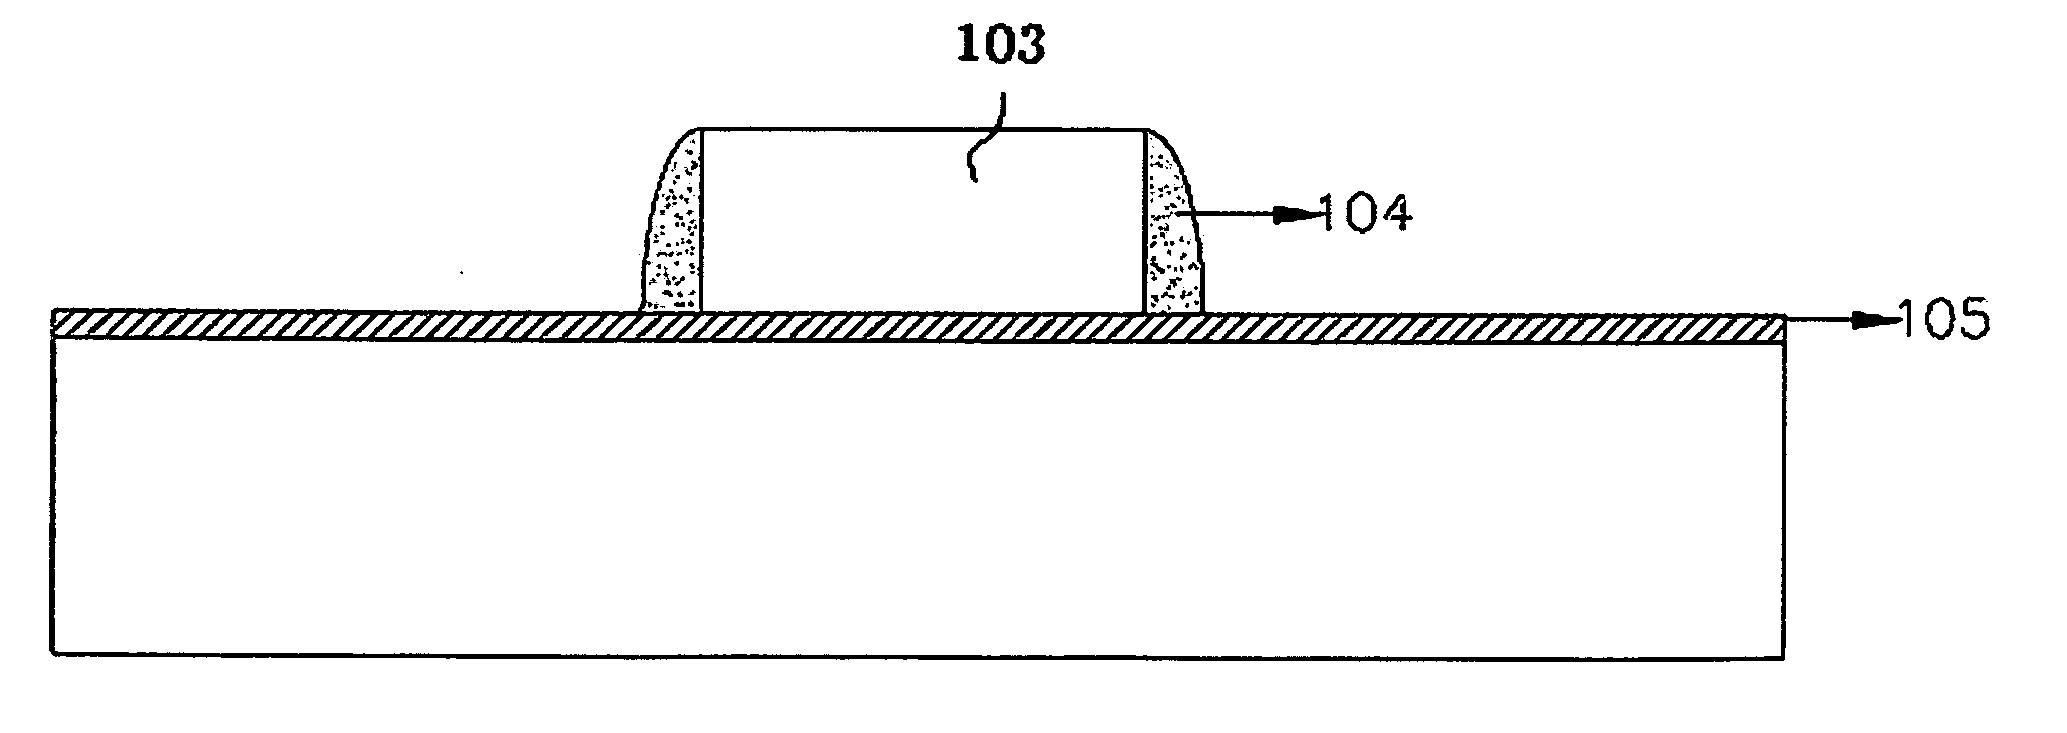 Nonvolatile memory device and methods of fabricating and driving the same